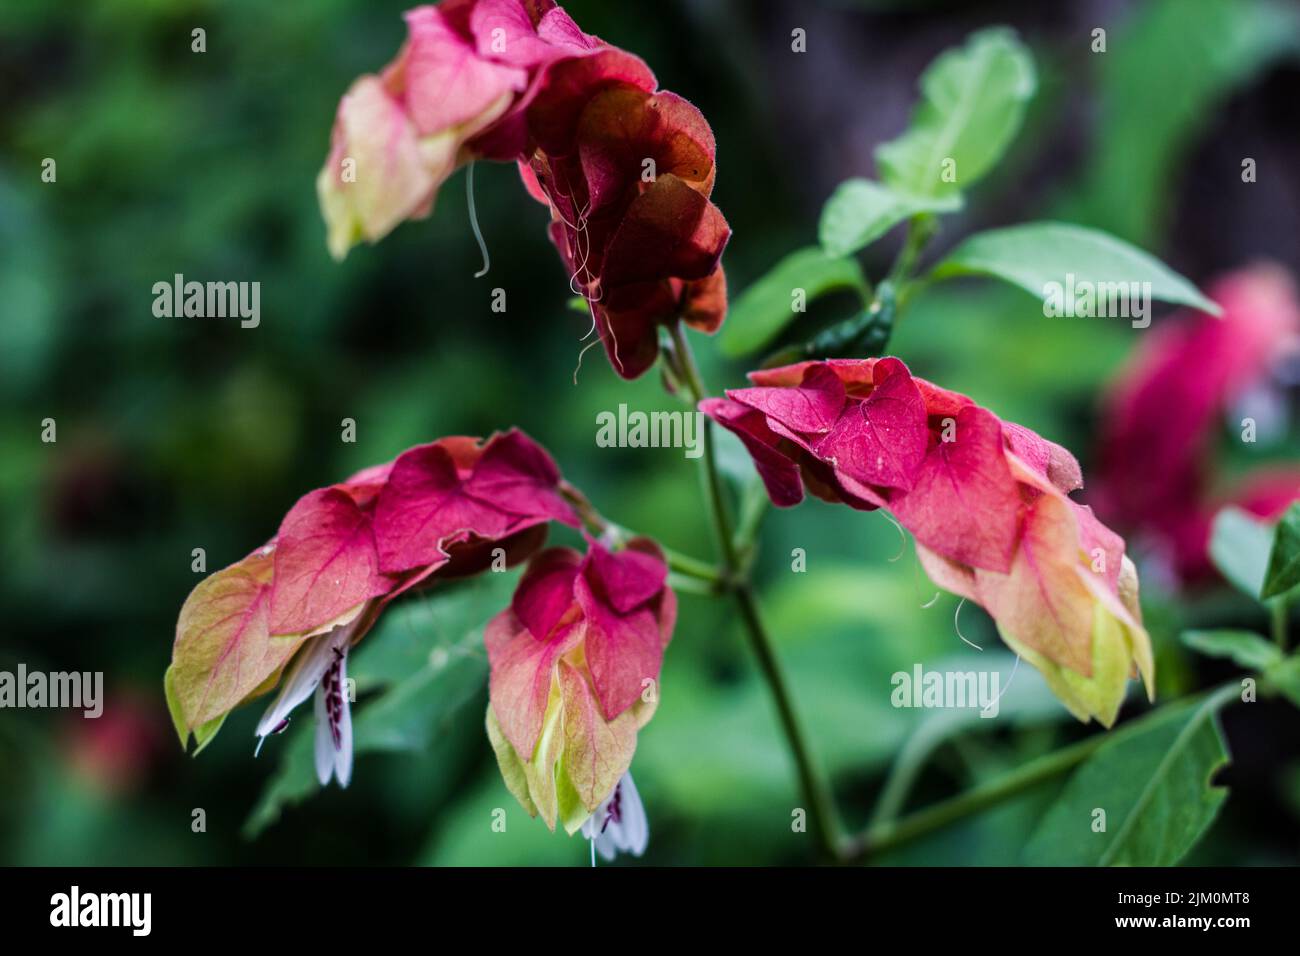 The close-up shot of Justicia flower pink-purple leaves Stock Photo